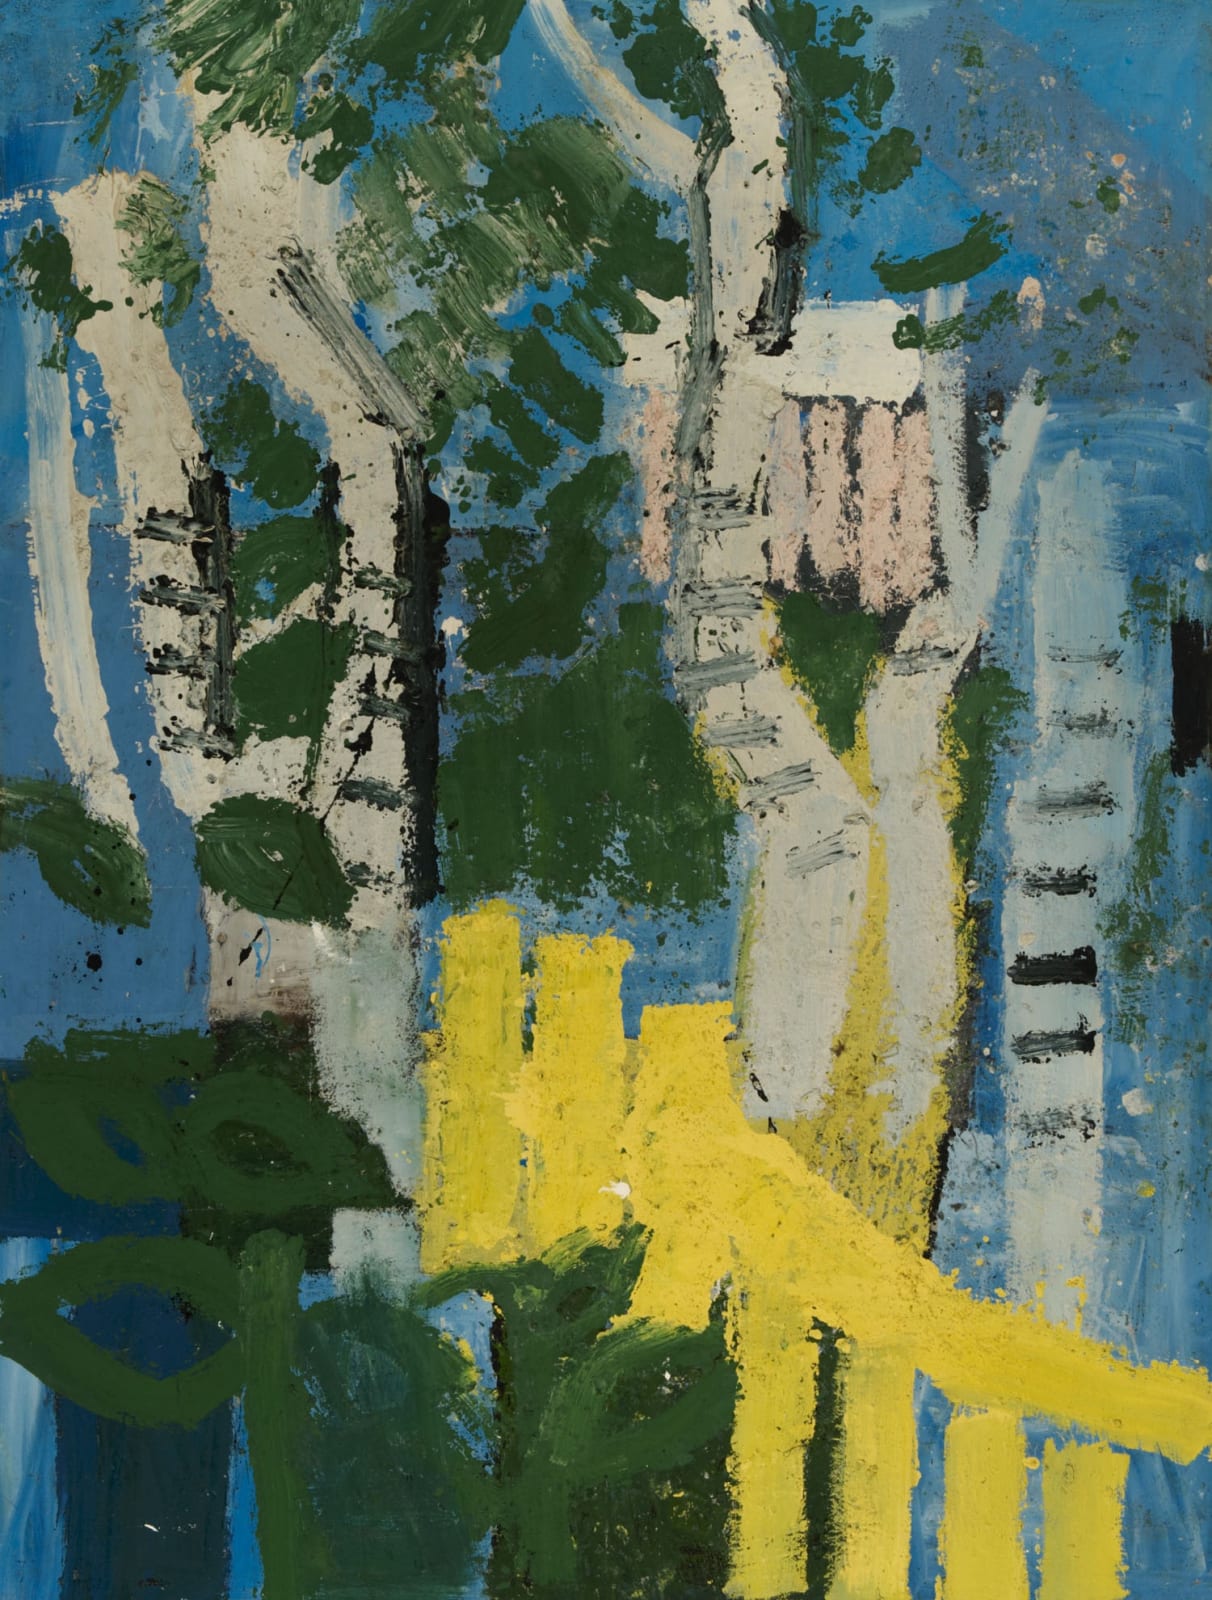 Joash Woodrow (1927-2006) White Trees and Yellow Fence 1980 Oil and household paint on board 217.5 x 165 cm Ben Uri Collection © Joash Woodrow estate To see and discover more about this artist click here